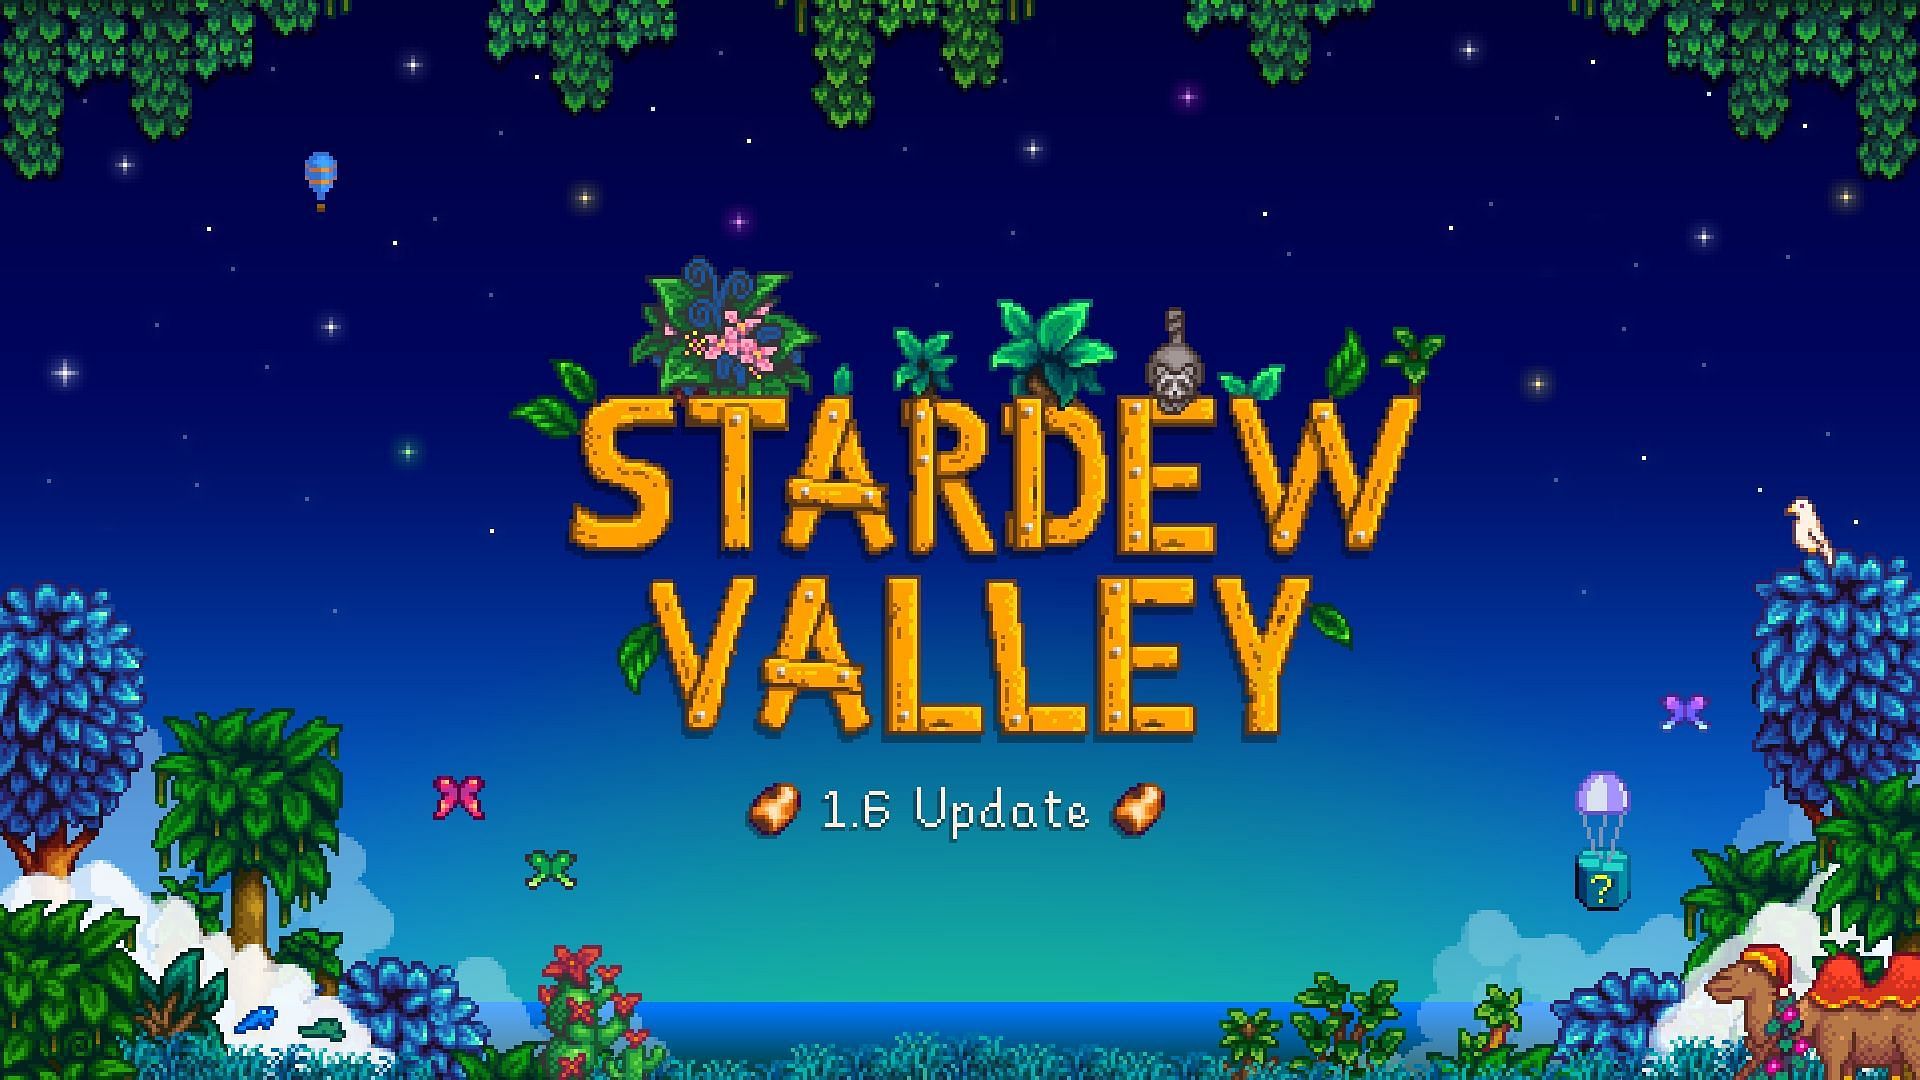 Stardew Valley 1.6 is now available on Steam.